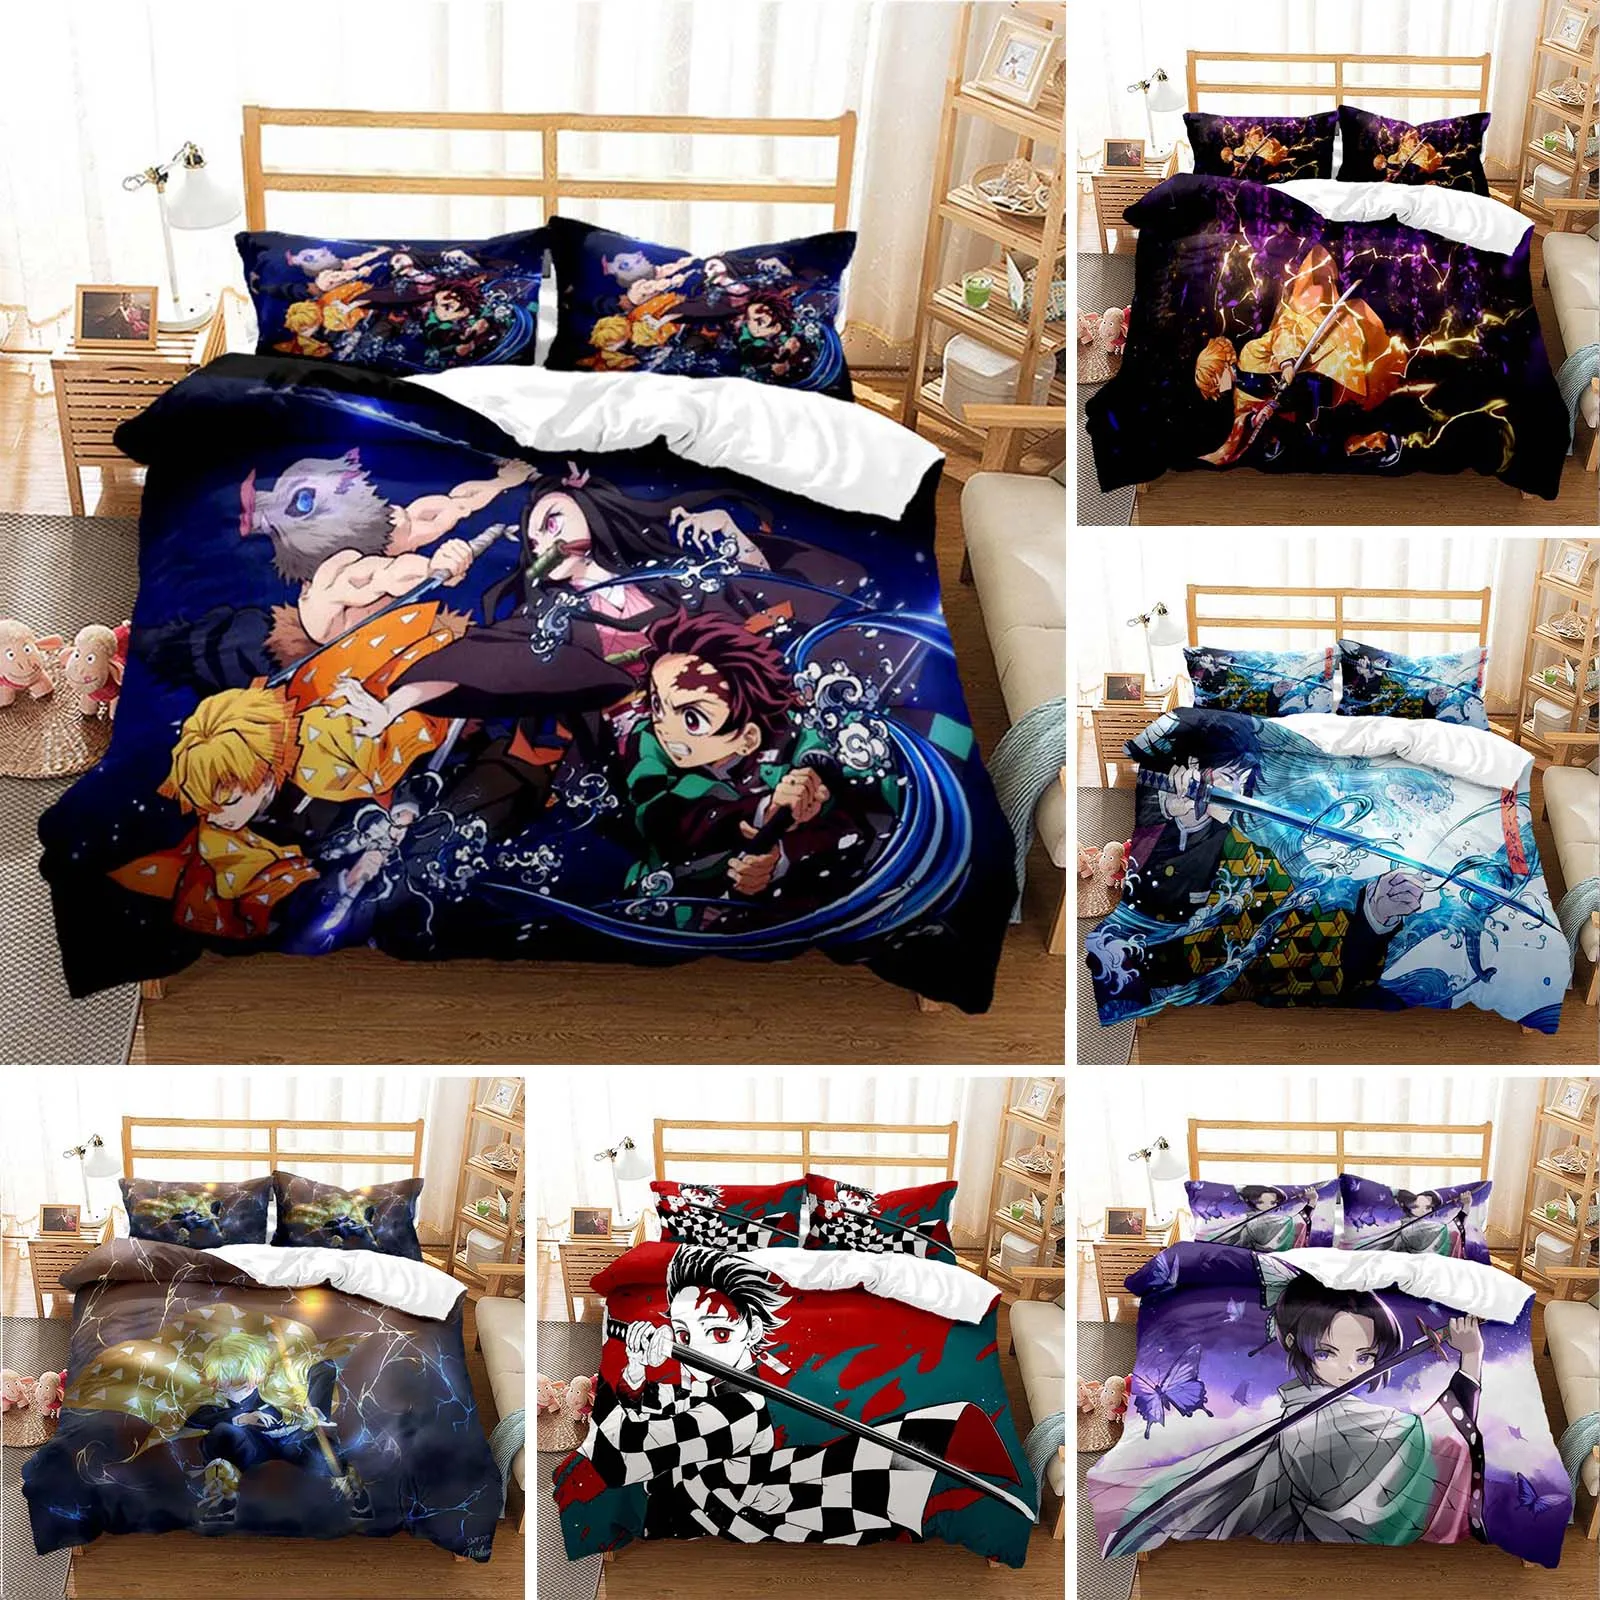 

3D Printed Anime Demon Slayer Bedding Set Nezuko Tanjirou Duvet Cover Double Twin Full Queen King Adult Kids Quilt Cover